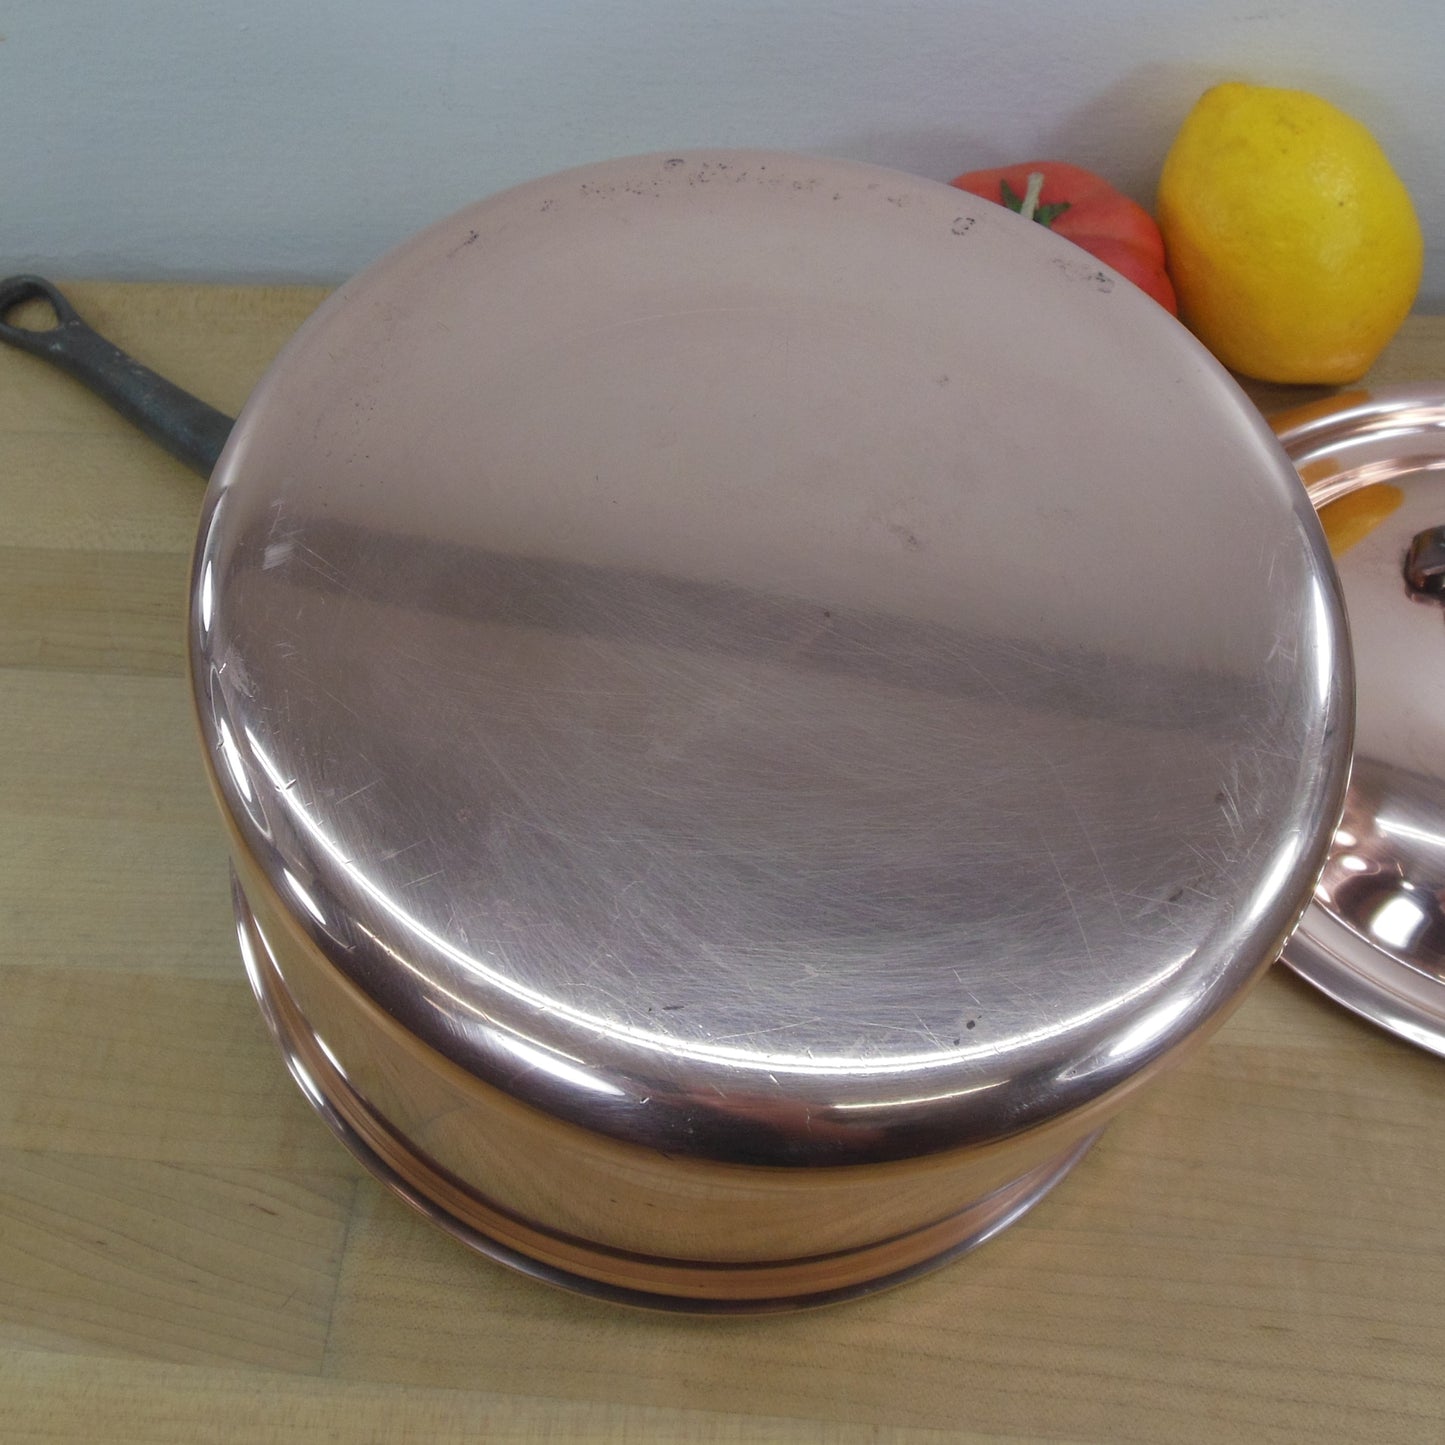 Unbranded Mauviel France Copper Stainless 3.5 Saucepan & Cover Bottom cast Iron handles